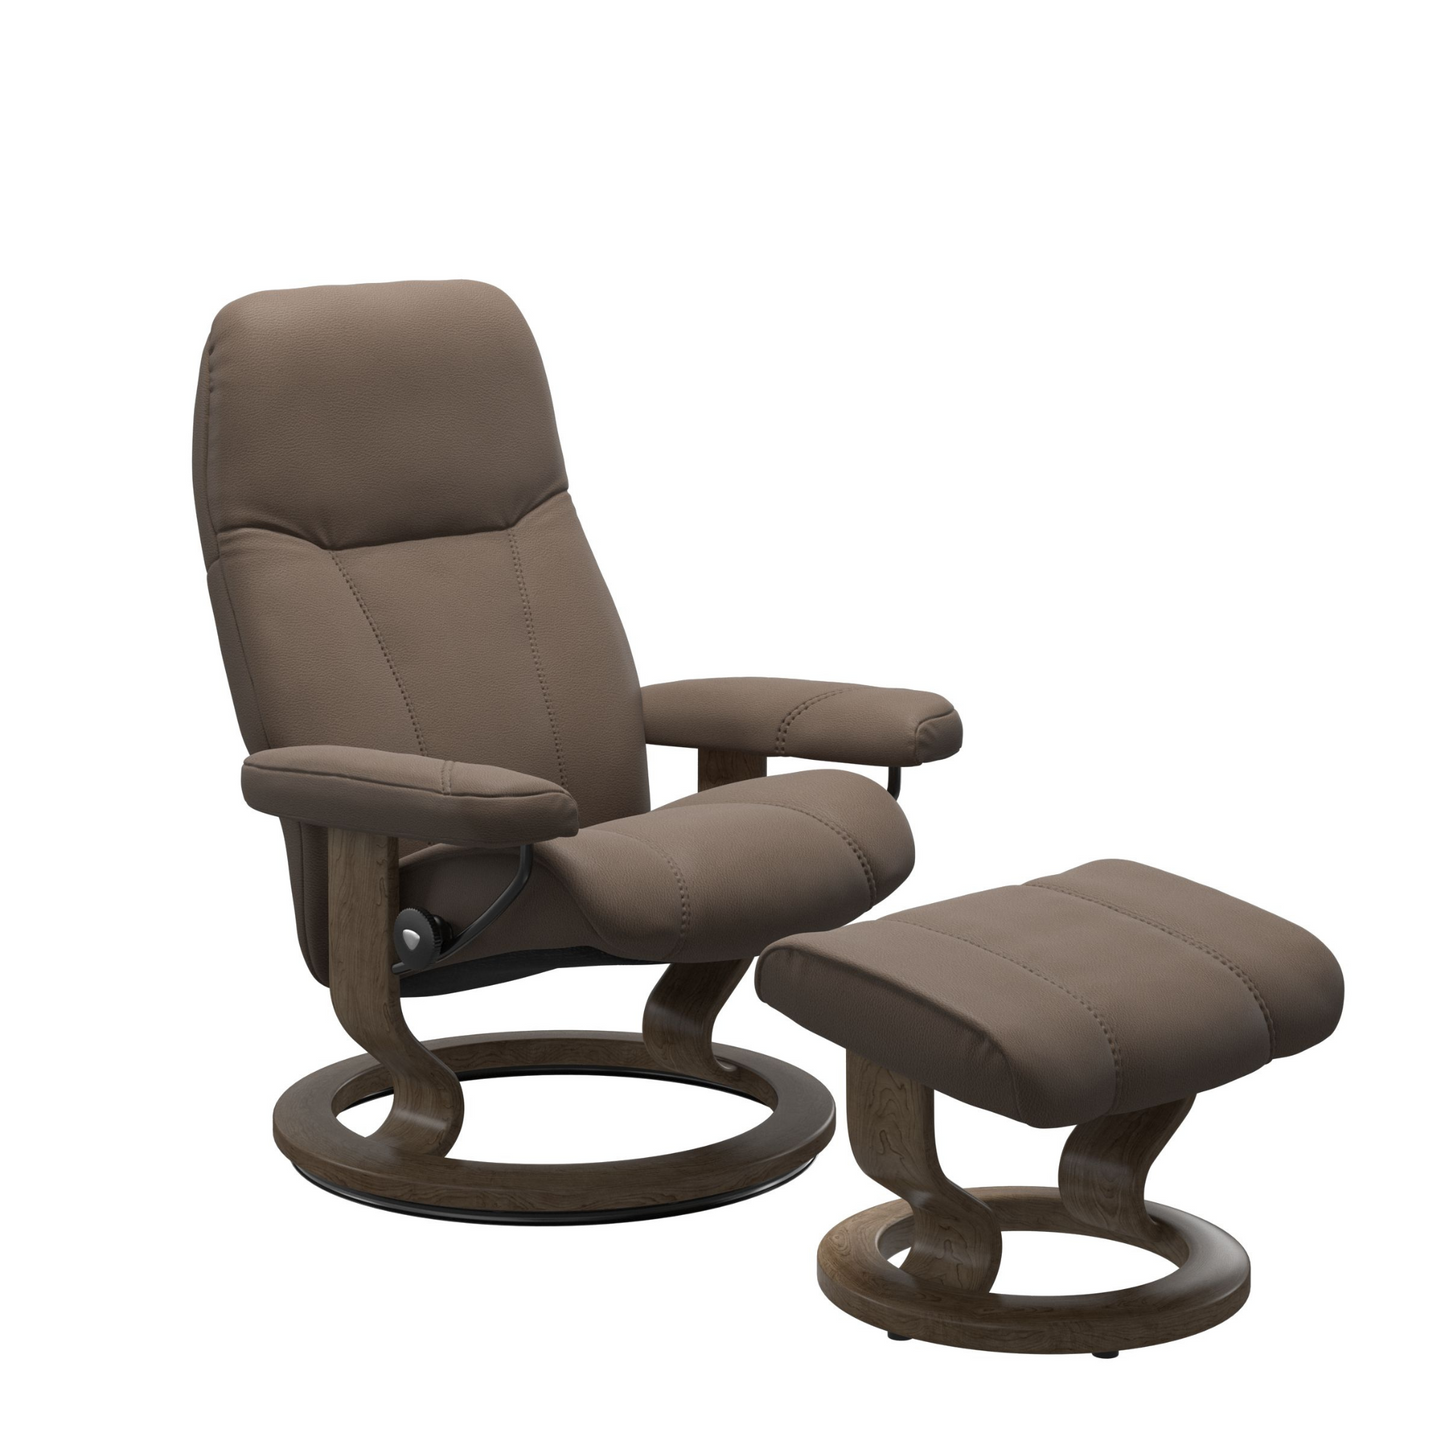 Consul Medium Recliner Chair & Stool Classic Base by Stressless